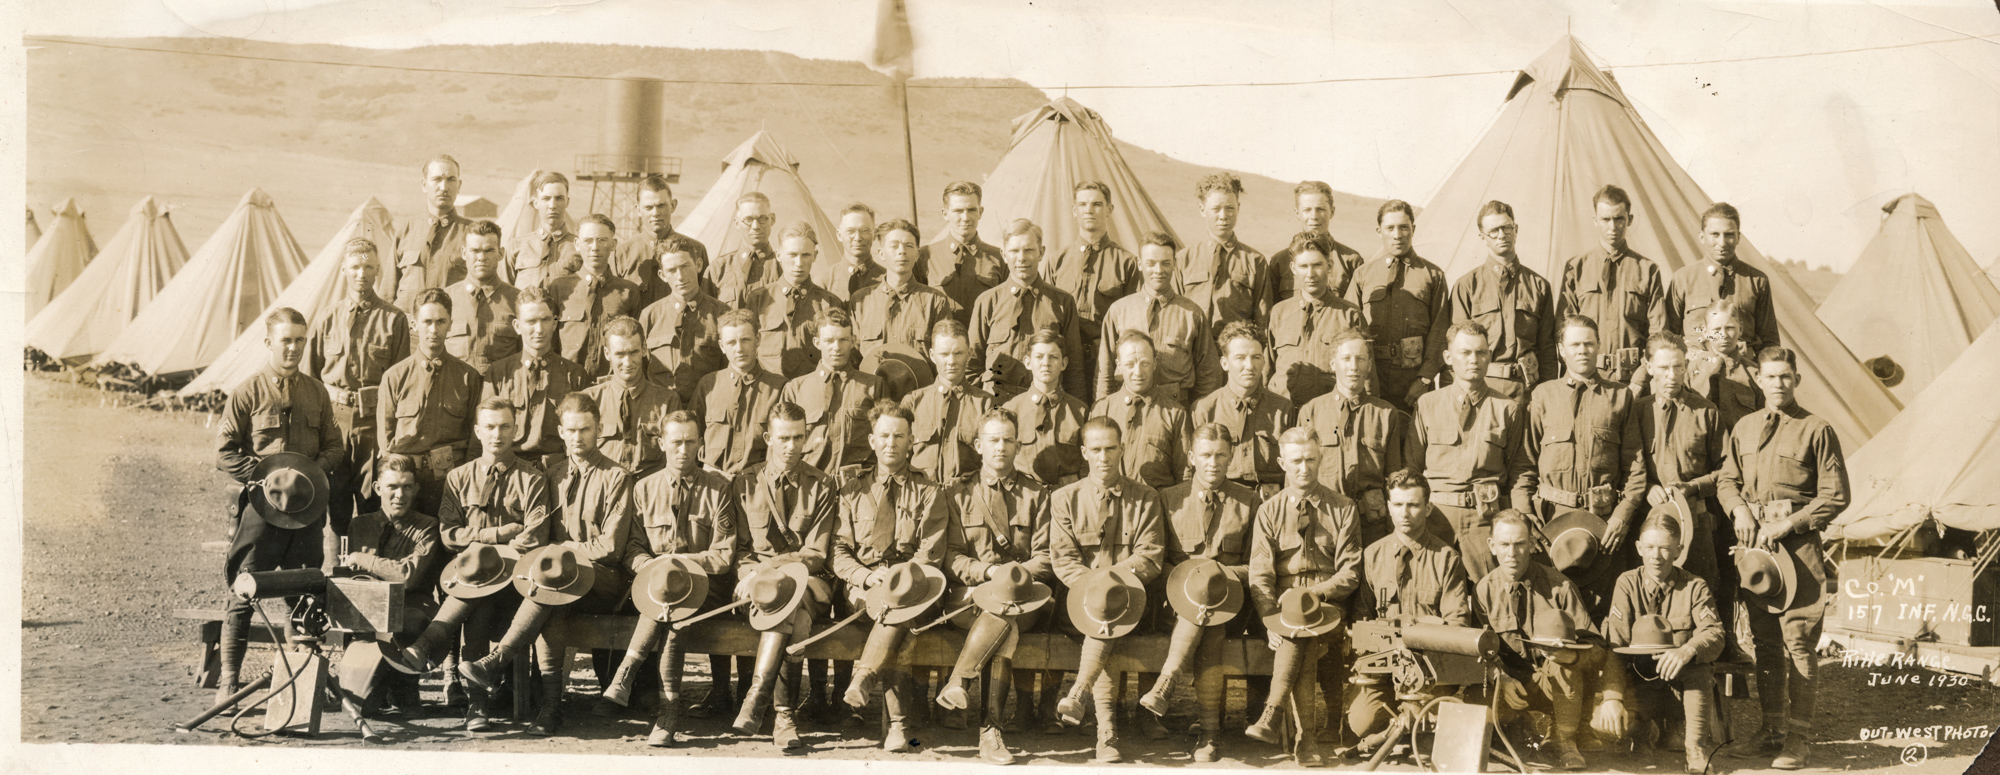 Dauth Family Archive - 1930-06 - June Dauth With National Guard Company M